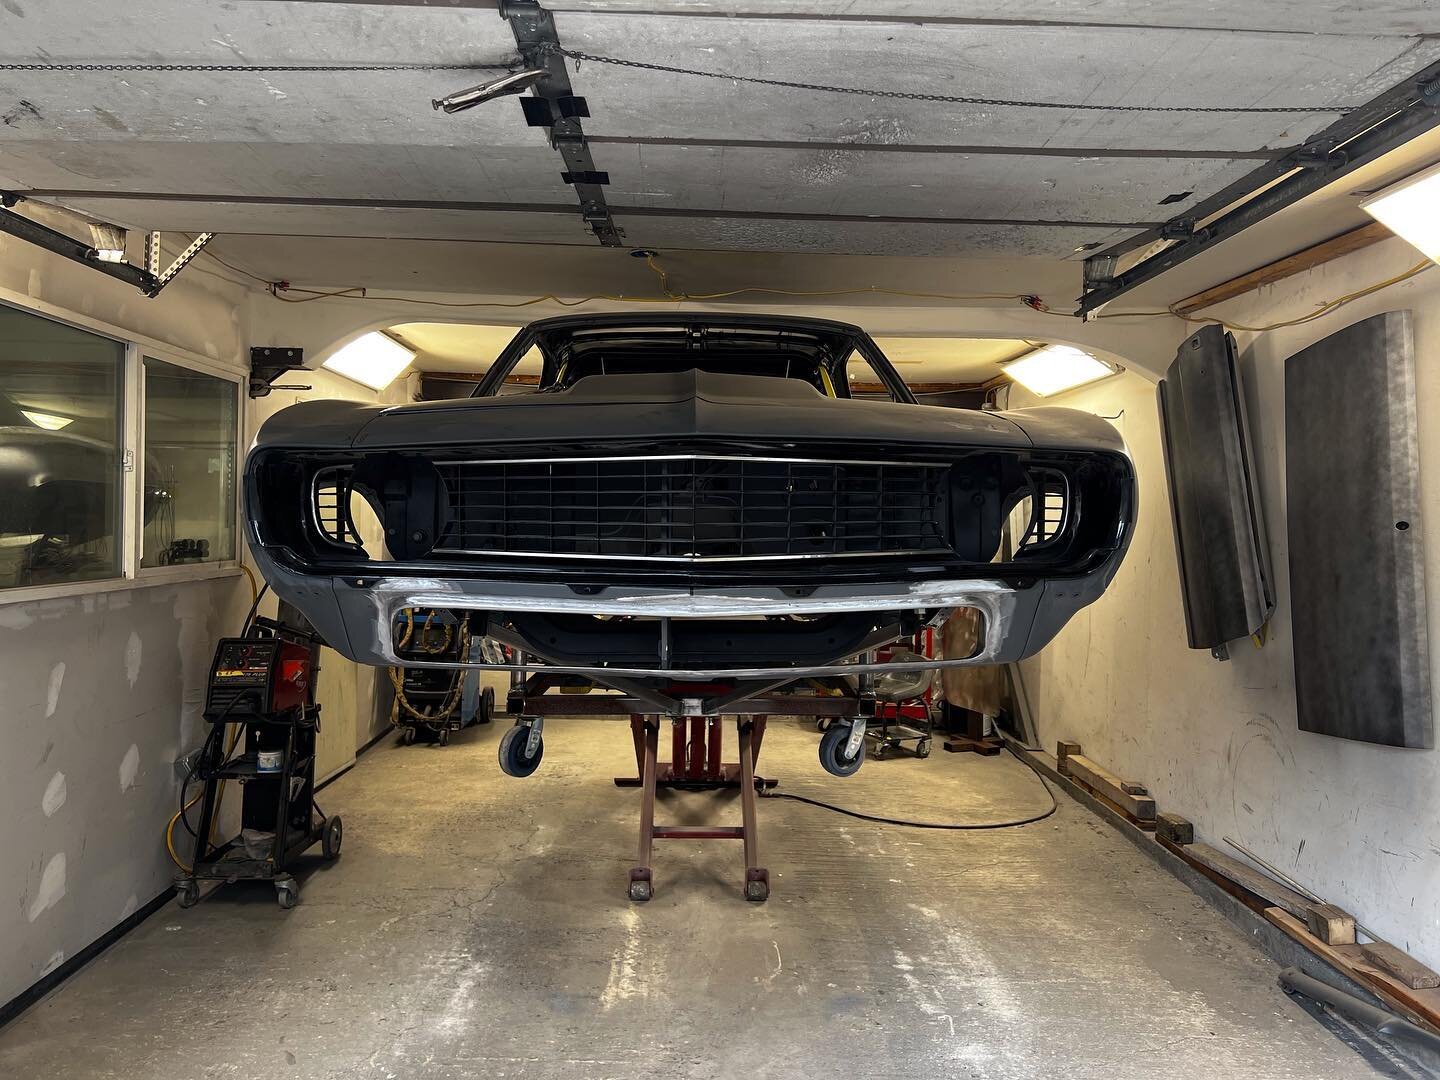 69 Camaro build coming soon. Currently under the knife and prepping for paint with our good friend Jeff Haskin. Can&rsquo;t wait to see this one @j_patterson @speedtech_performance @forgeline @stoptech @rickstanks @wegnerautomotive @tiltoneng